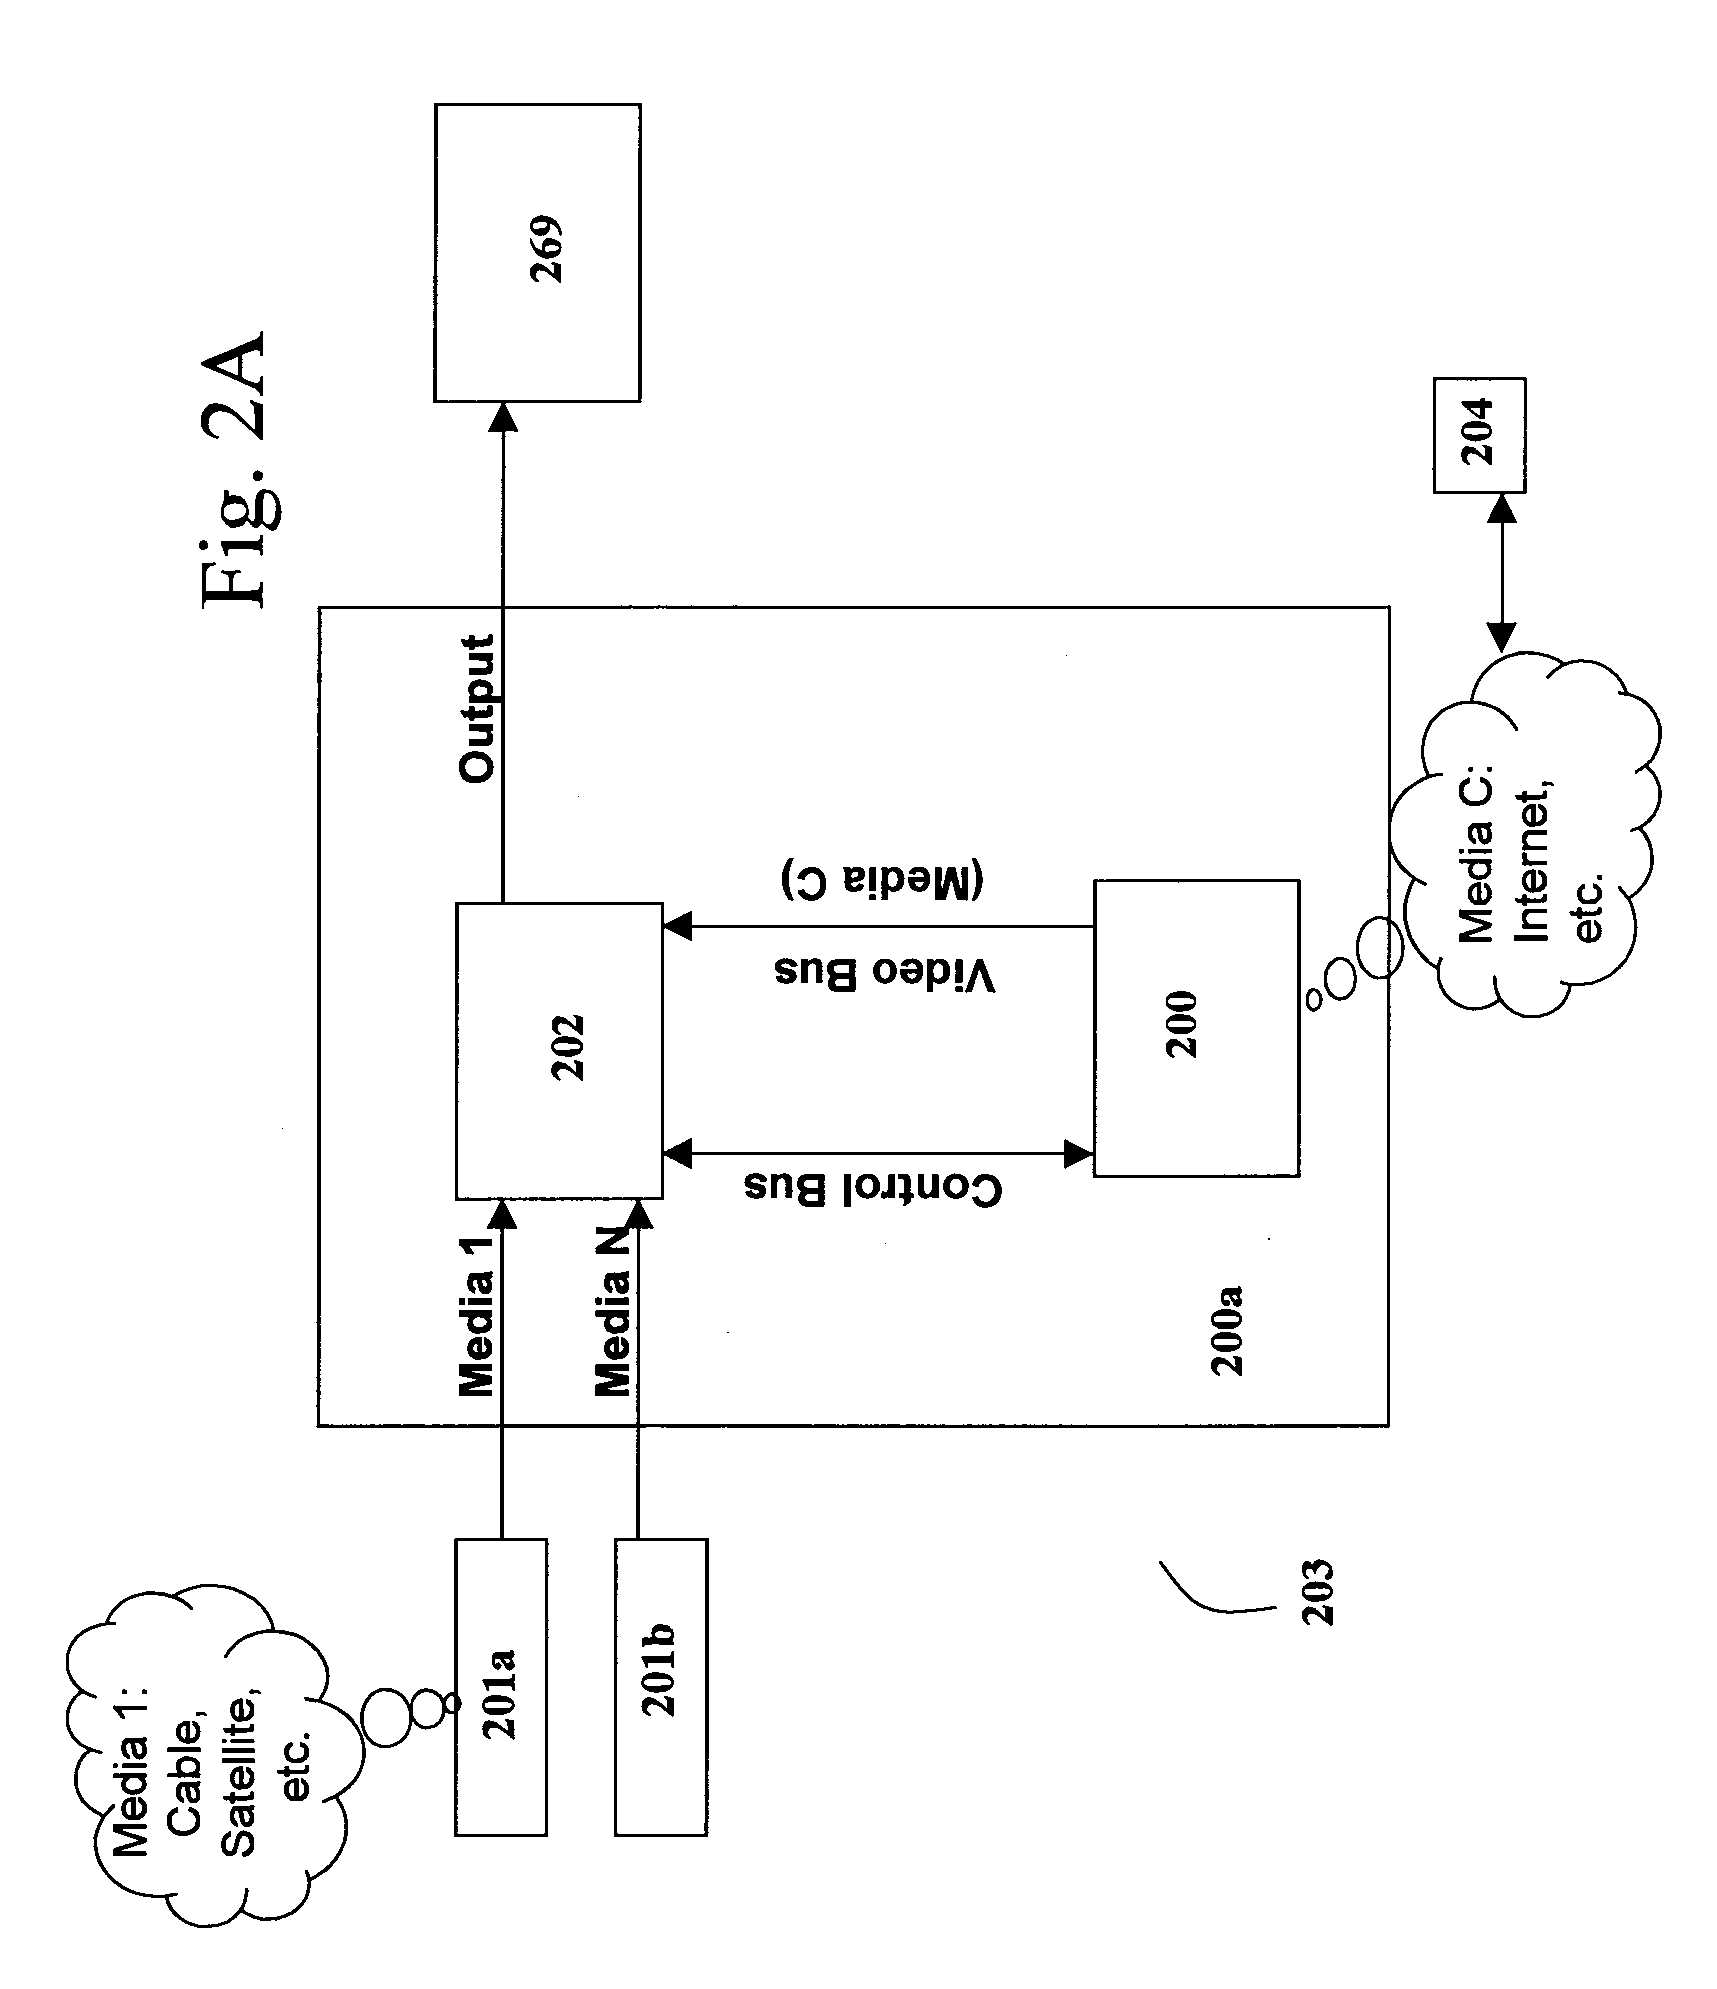 Systems, methods and apparatuses for media integration and display